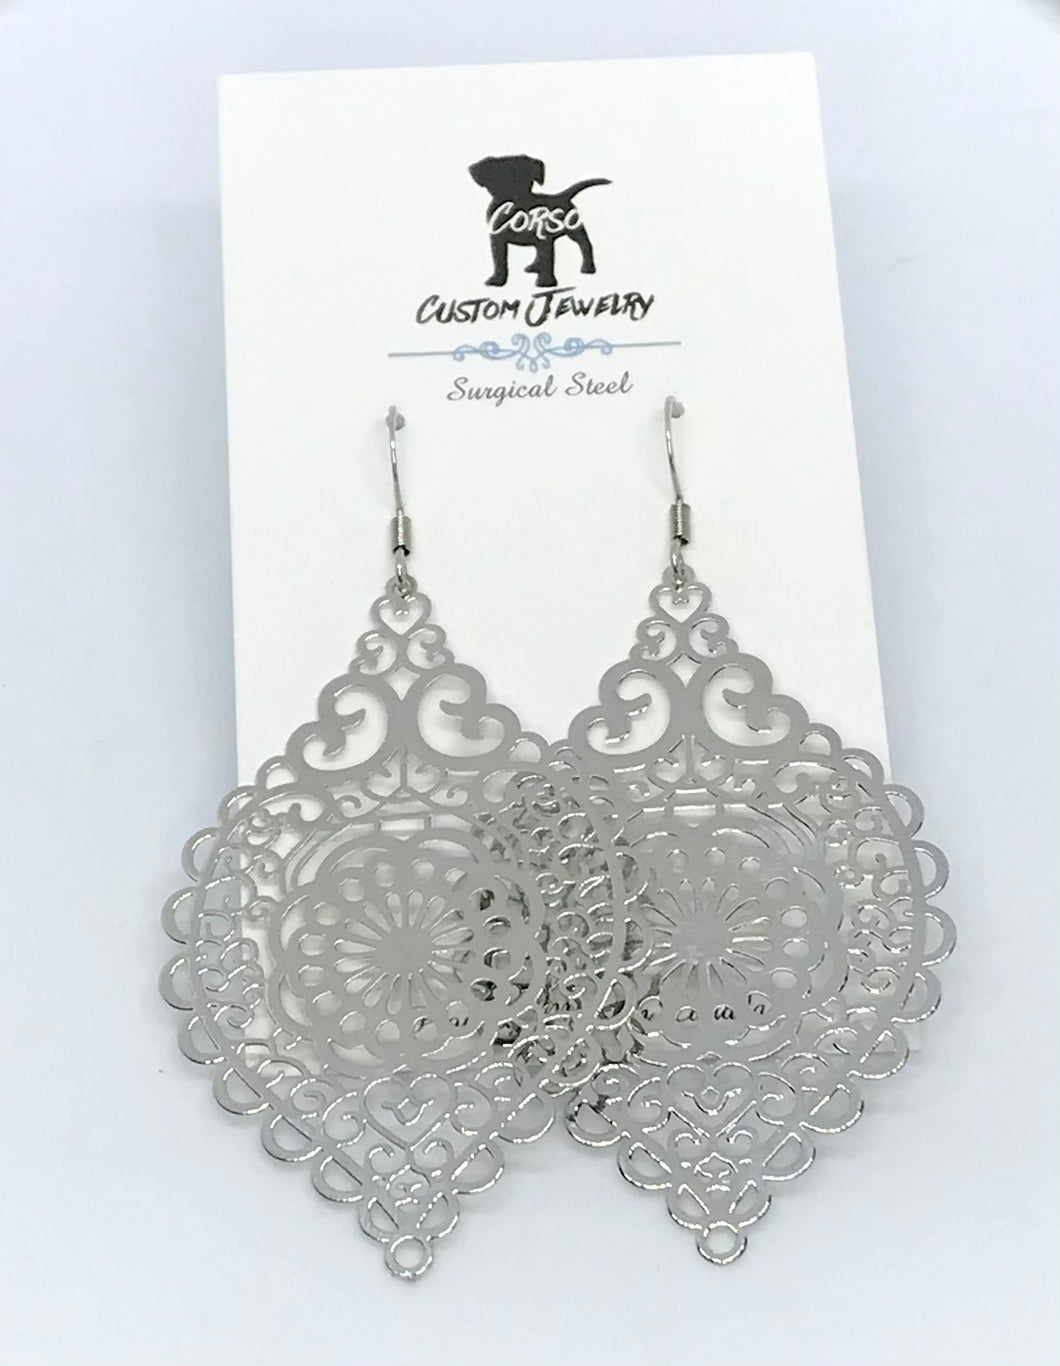 Silver Spindle Drop Earrings (Surgical Steel)